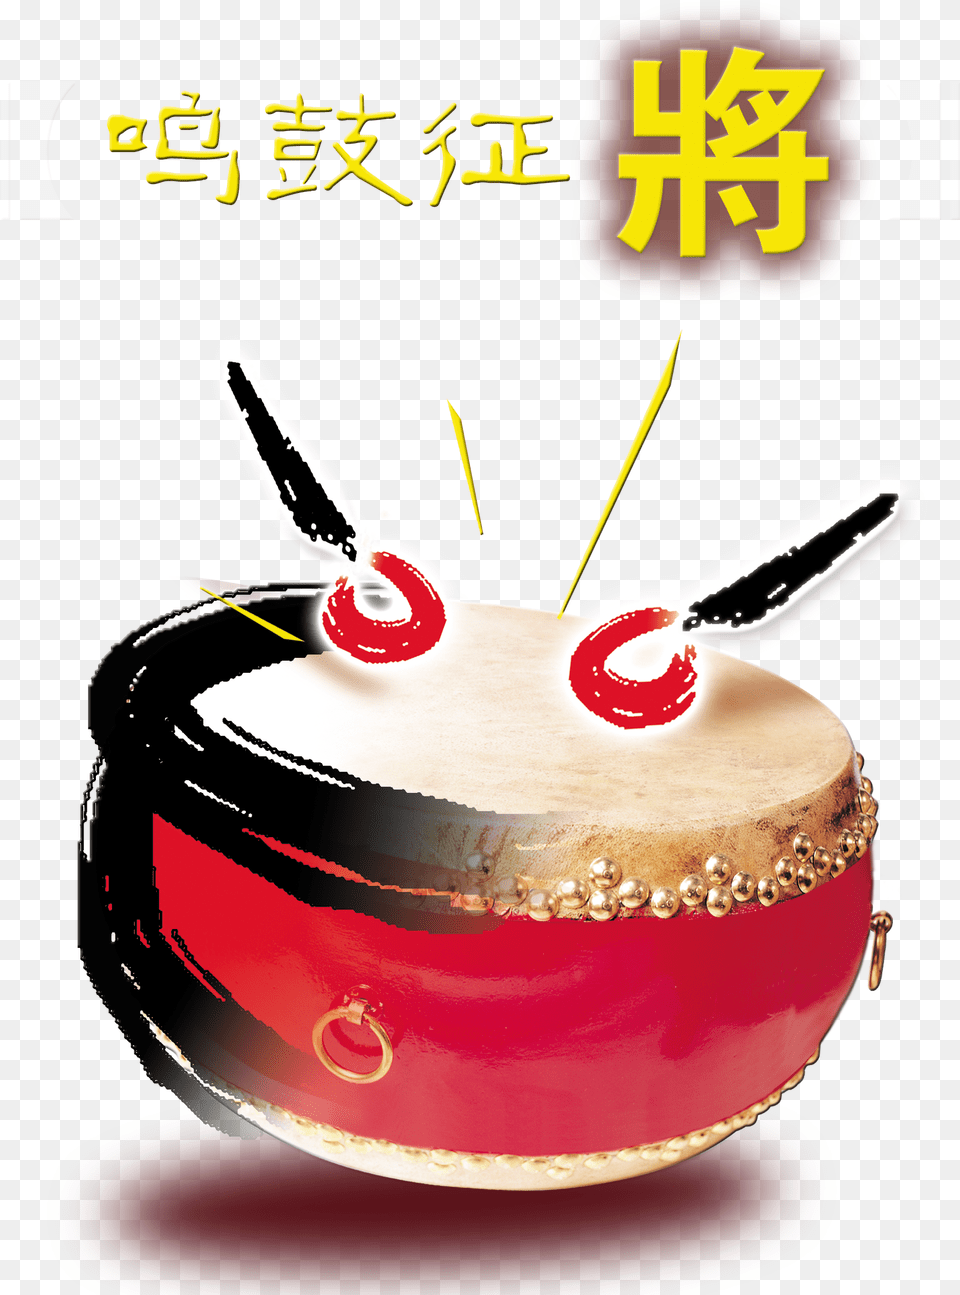 Ming Drum Zheng Will Recruit Drums For Artistic Design Drum, Musical Instrument, Percussion, Birthday Cake, Cake Png